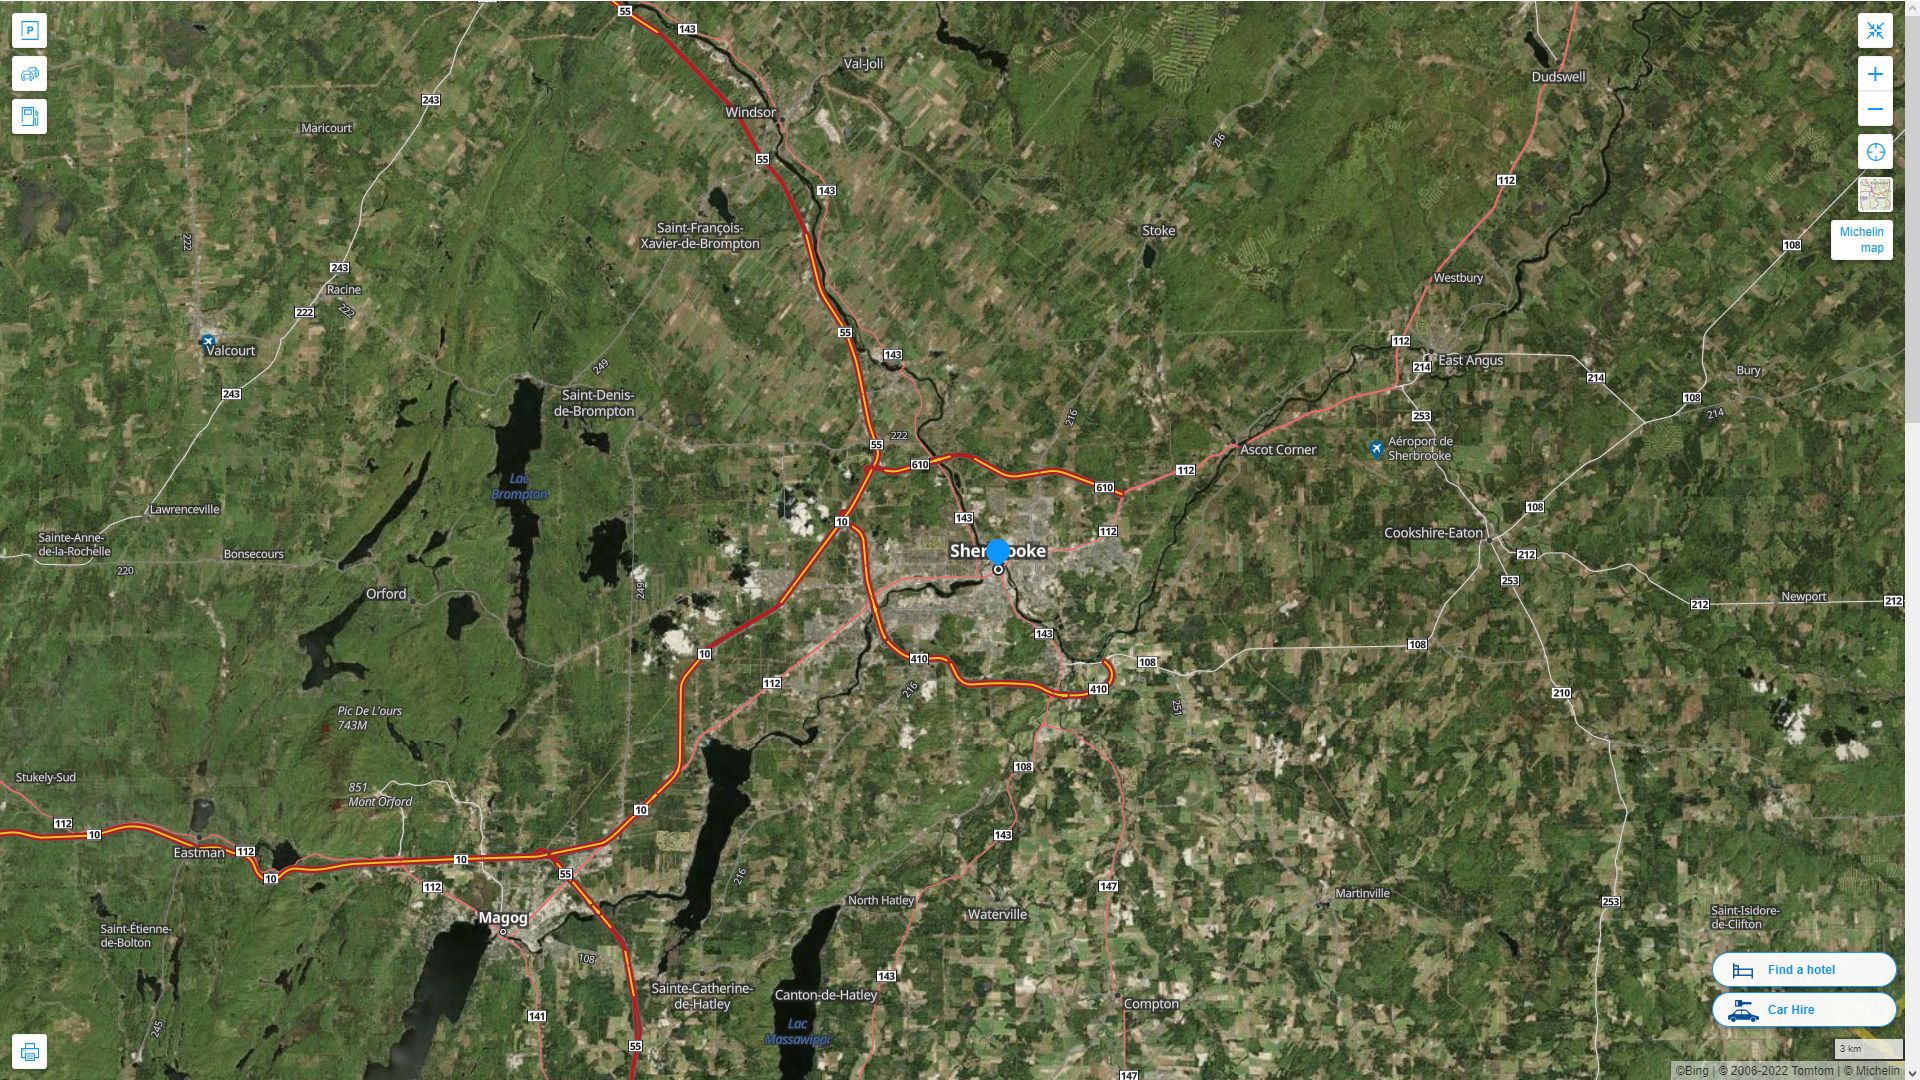 Sherbrooke Highway and Road Map with Satellite View